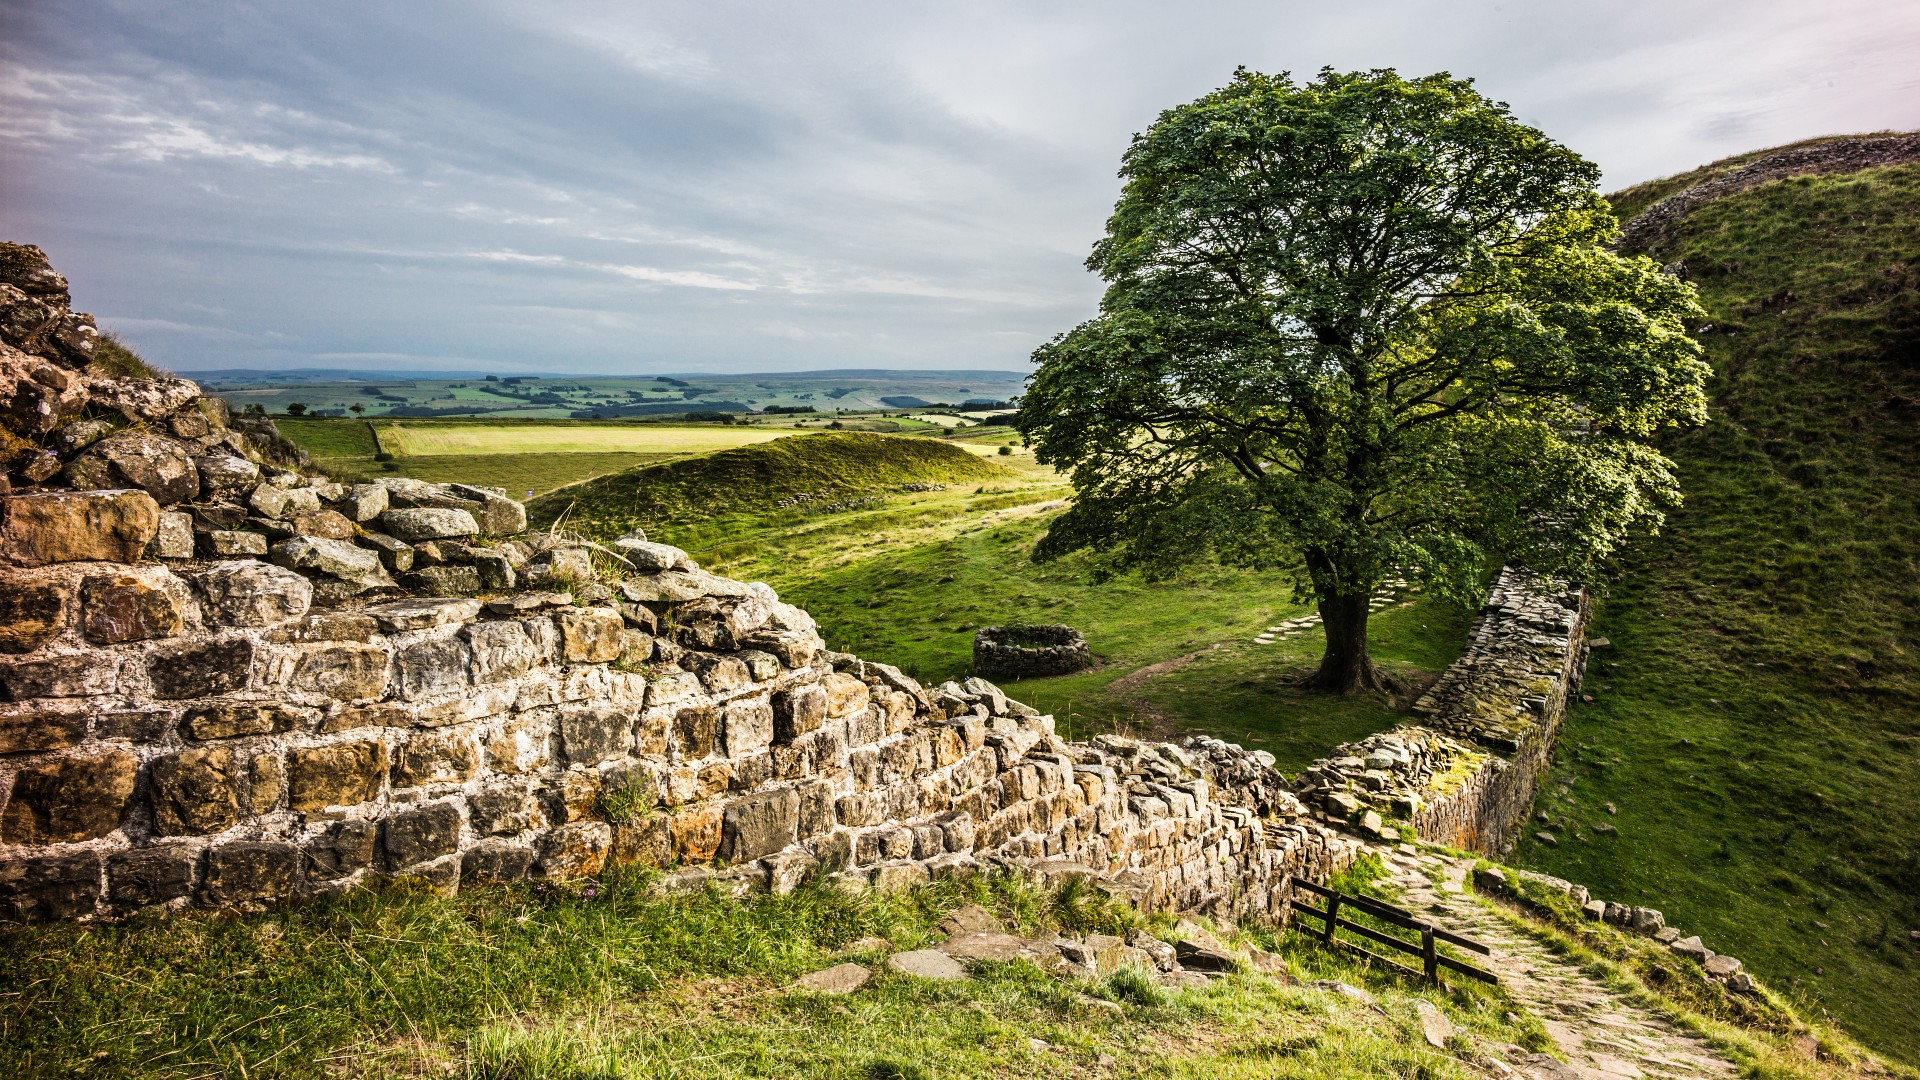 Sycamore Gap, Hadrian's Wall. Roy JAMES Shakespeare via Getty Images.